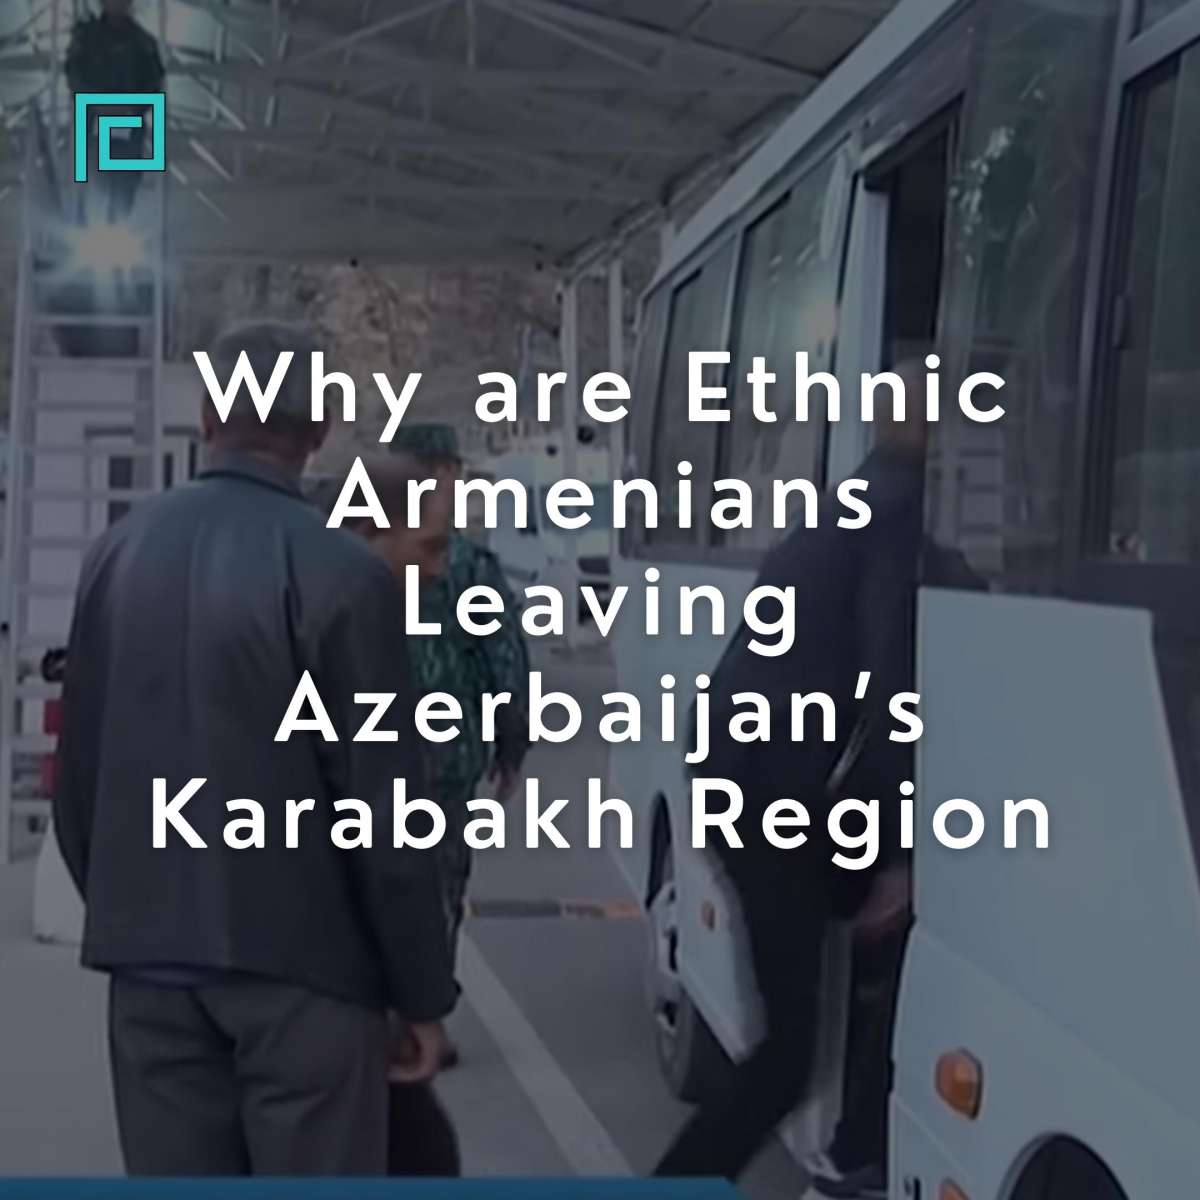 Why Are Ethnic Armenians Leaving?